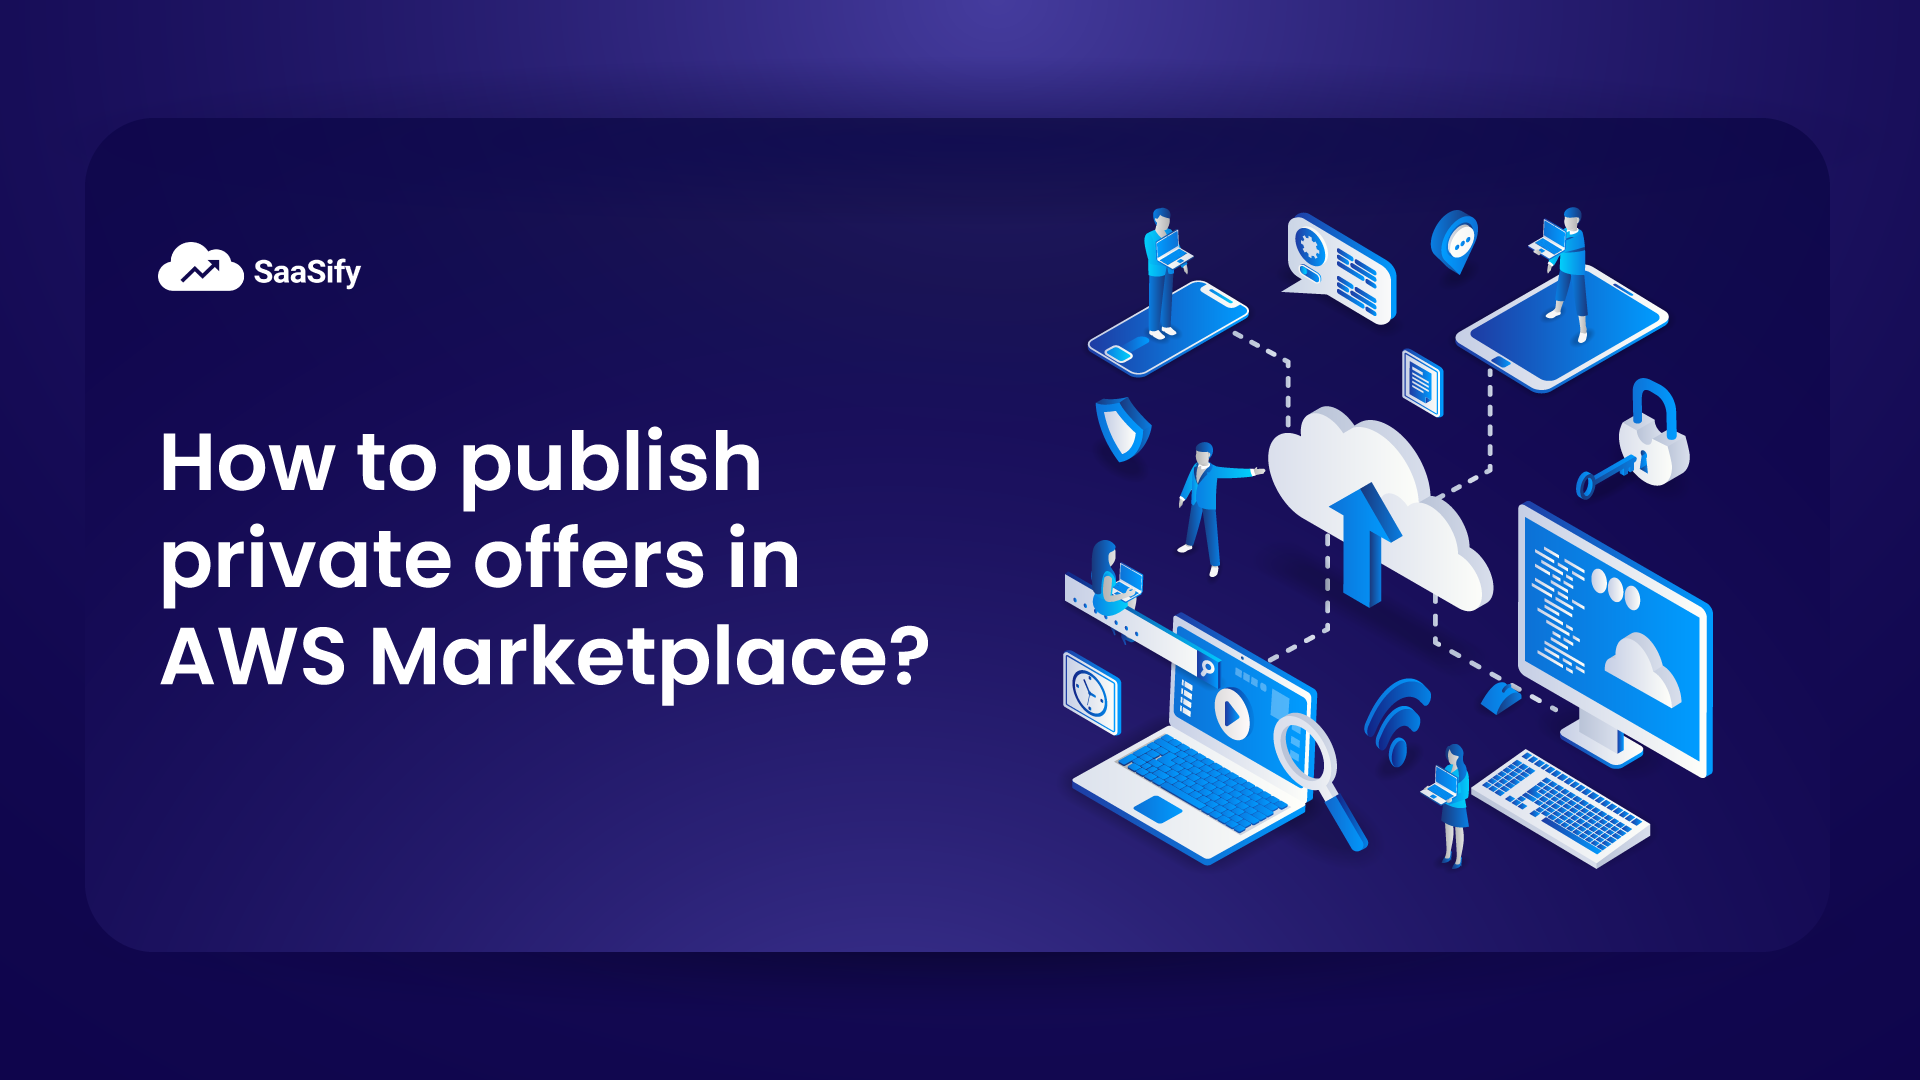 14 steps to publish private offers in AWS Marketplace for success